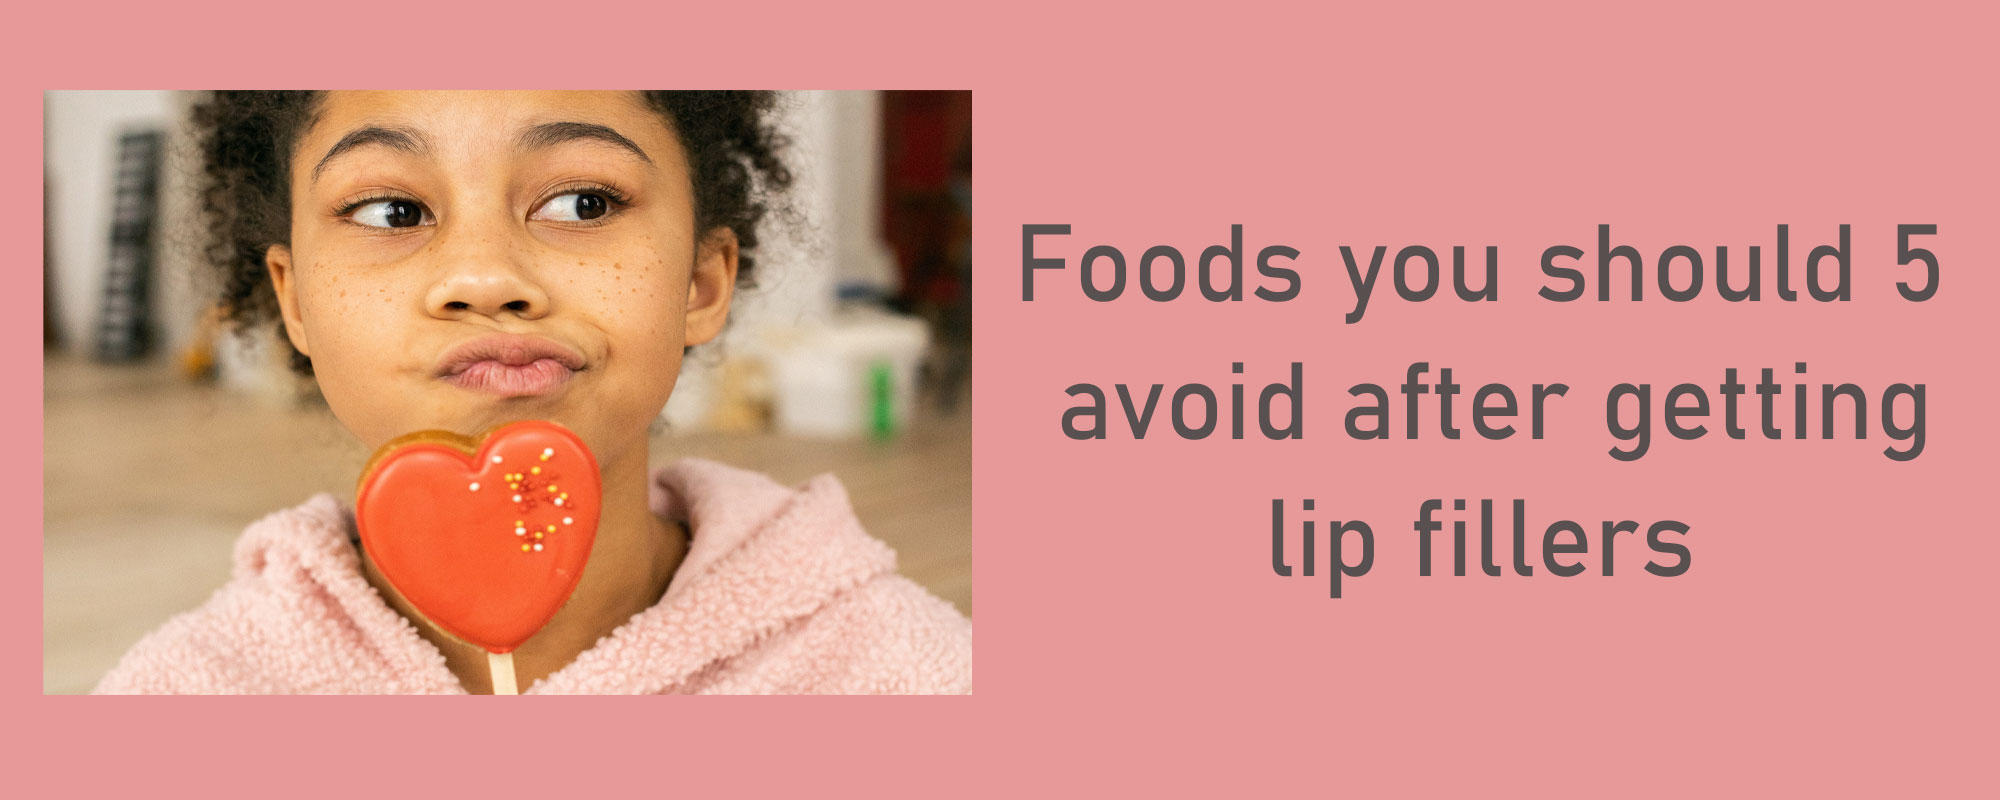 5 Foods You Should Avoid After Getting Lip Fillers - 1